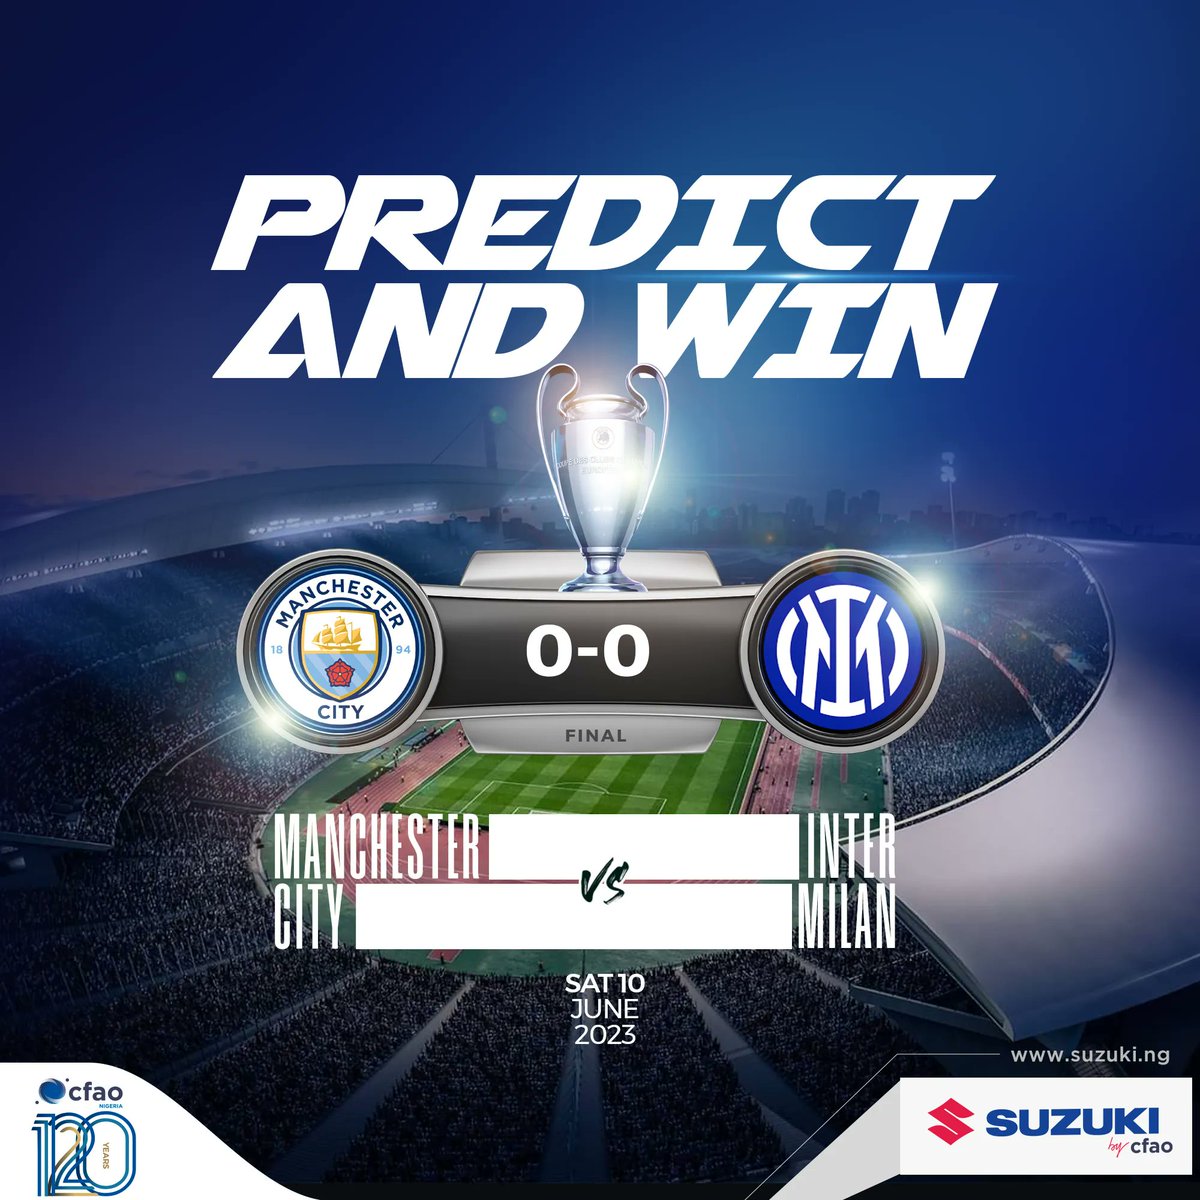 • Predict the 90 mins score accurately;
• Like this post and follow the page;
• Use the hashtag #suzukibycfao;
• Tag 2 friends to the page.
• Two winners will be chosen at random

*Nigerian network subscribers only. 
#Suzuki #SuzukibyCFAO #uefa  #predictandwin